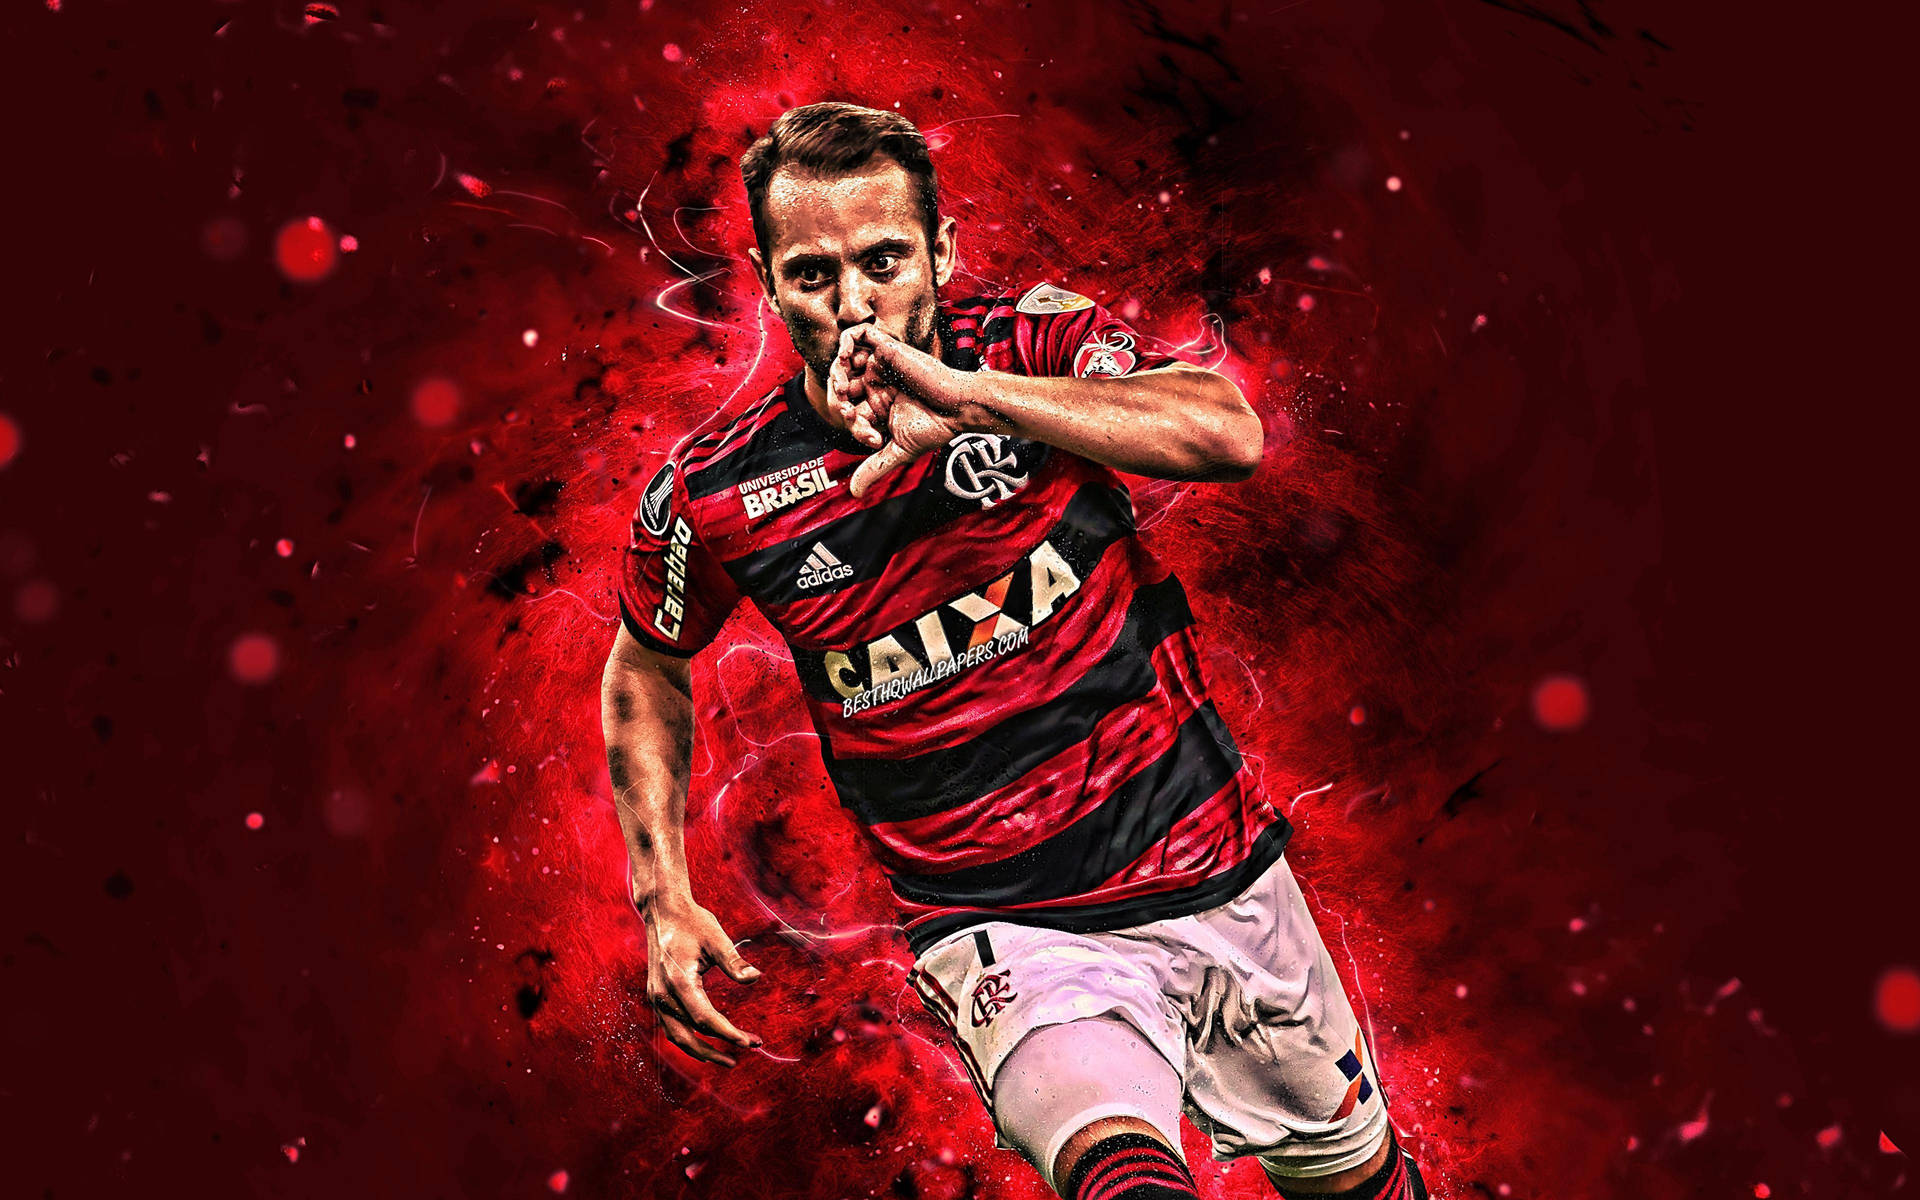 Flamengofc Ribeiro Can Be Translated To German As 